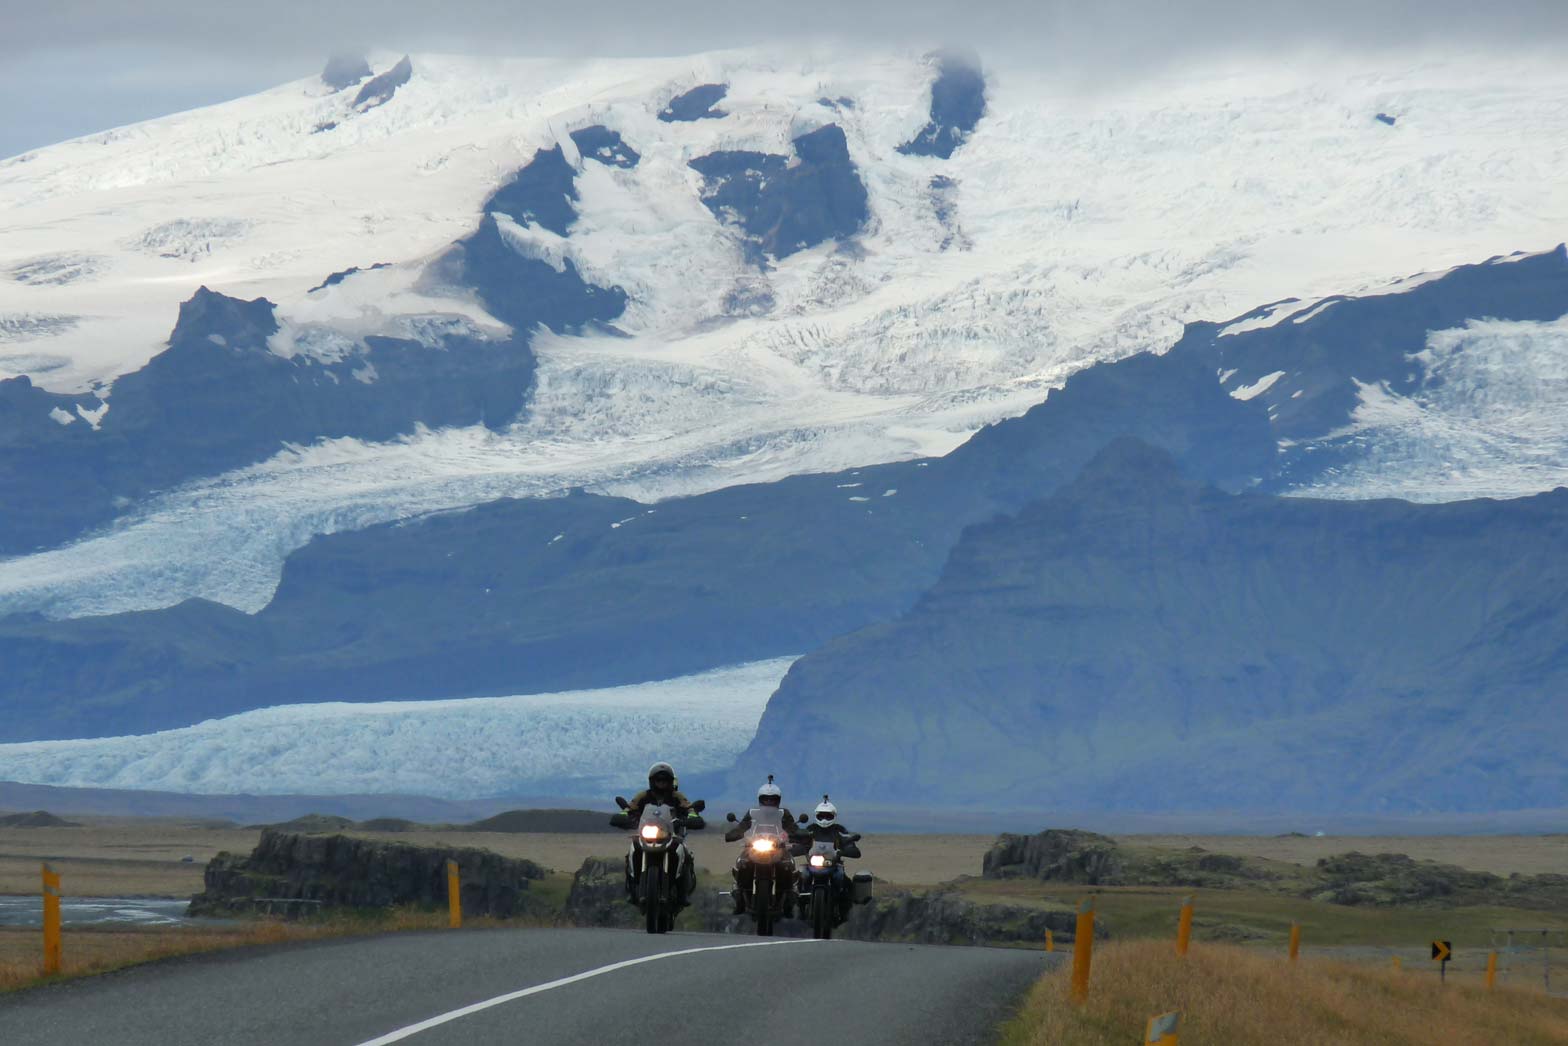 iceland motorcycle adventure tours